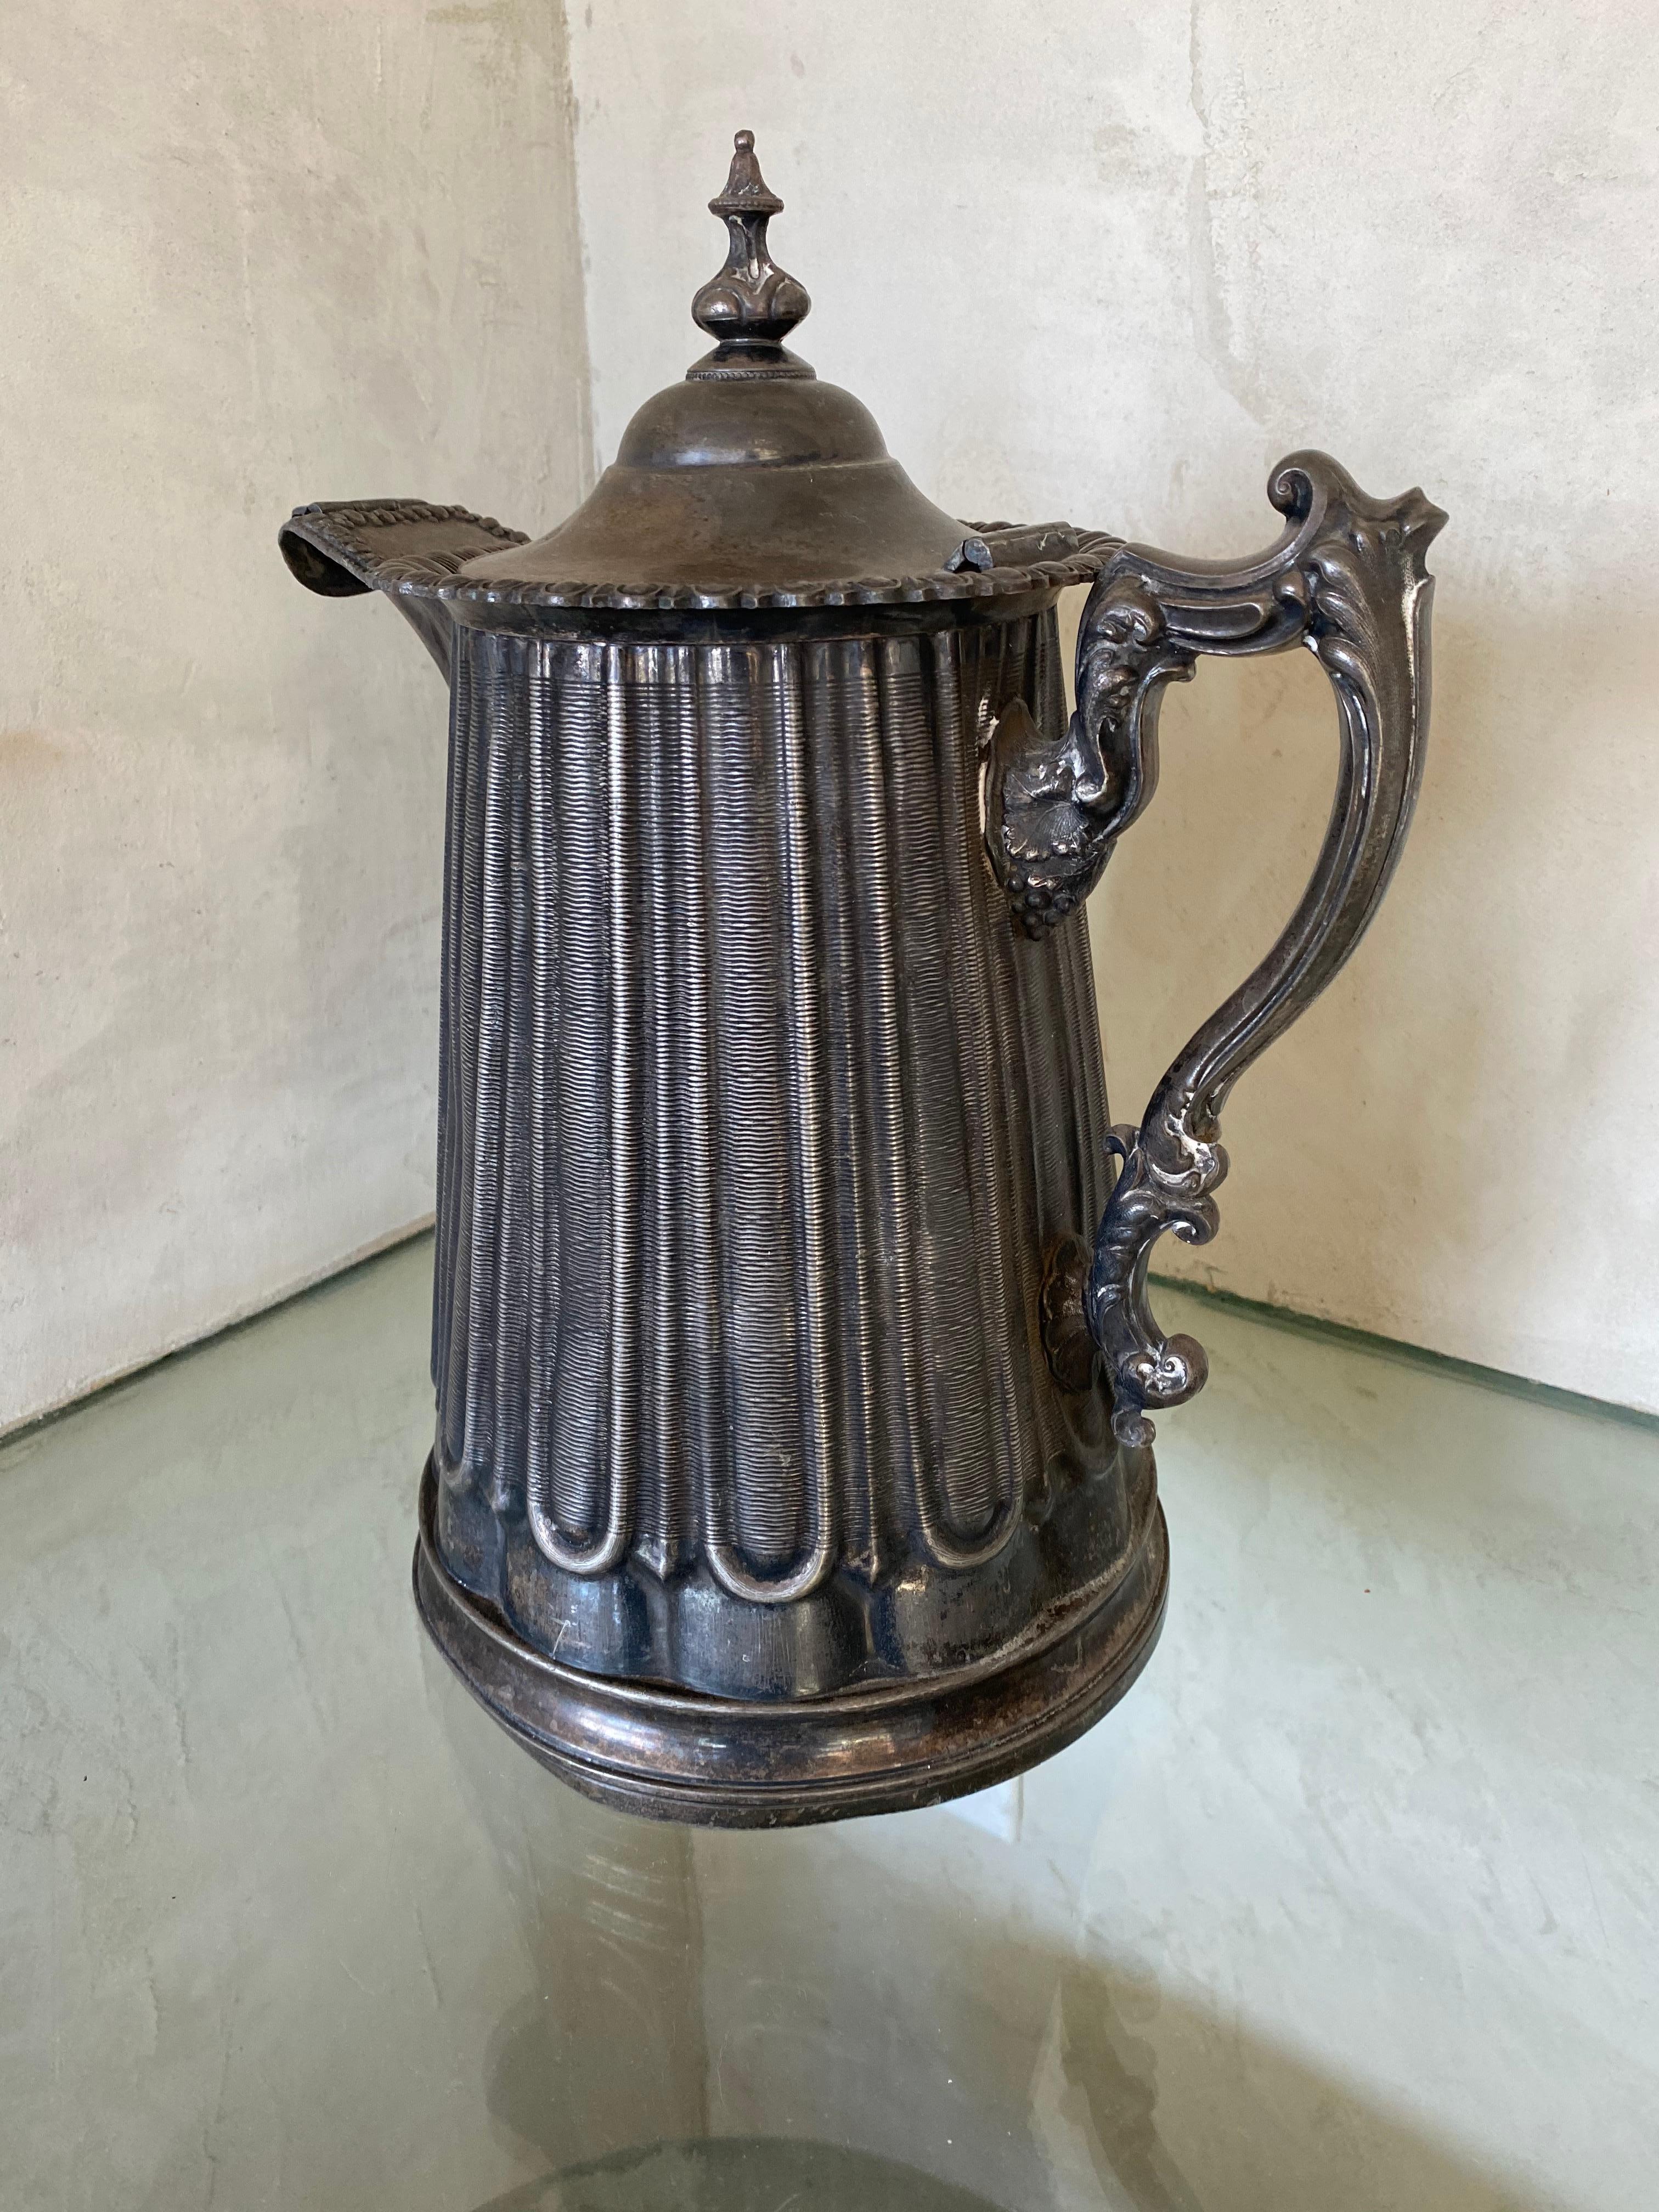 An exceptional, large antique Victorian walled pitcher for ice water has a bold circular rounded body. The jug makes a wonderful decorative piece. The upper rim is ornamented with an impressive egg and dart decorated border, incorporating a plain